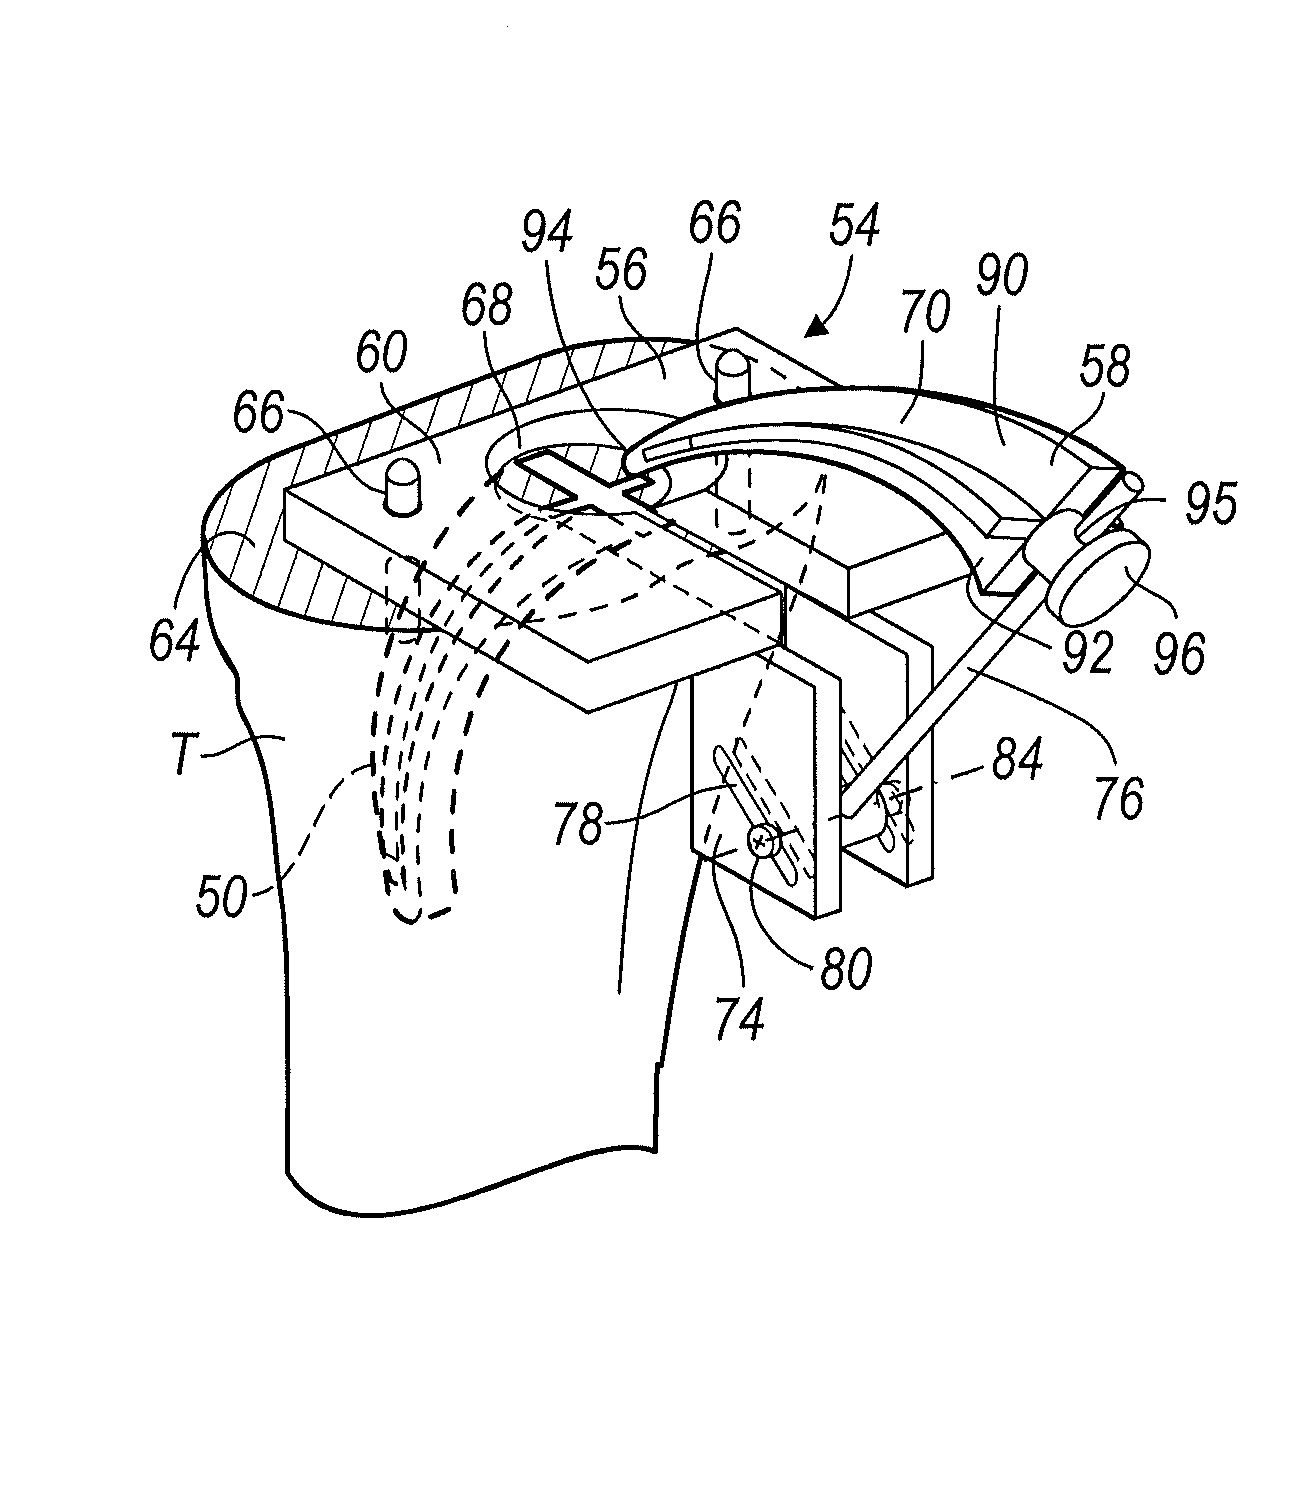 Instrumentation And Method For Implanting A Curved Stem Tibial Tray